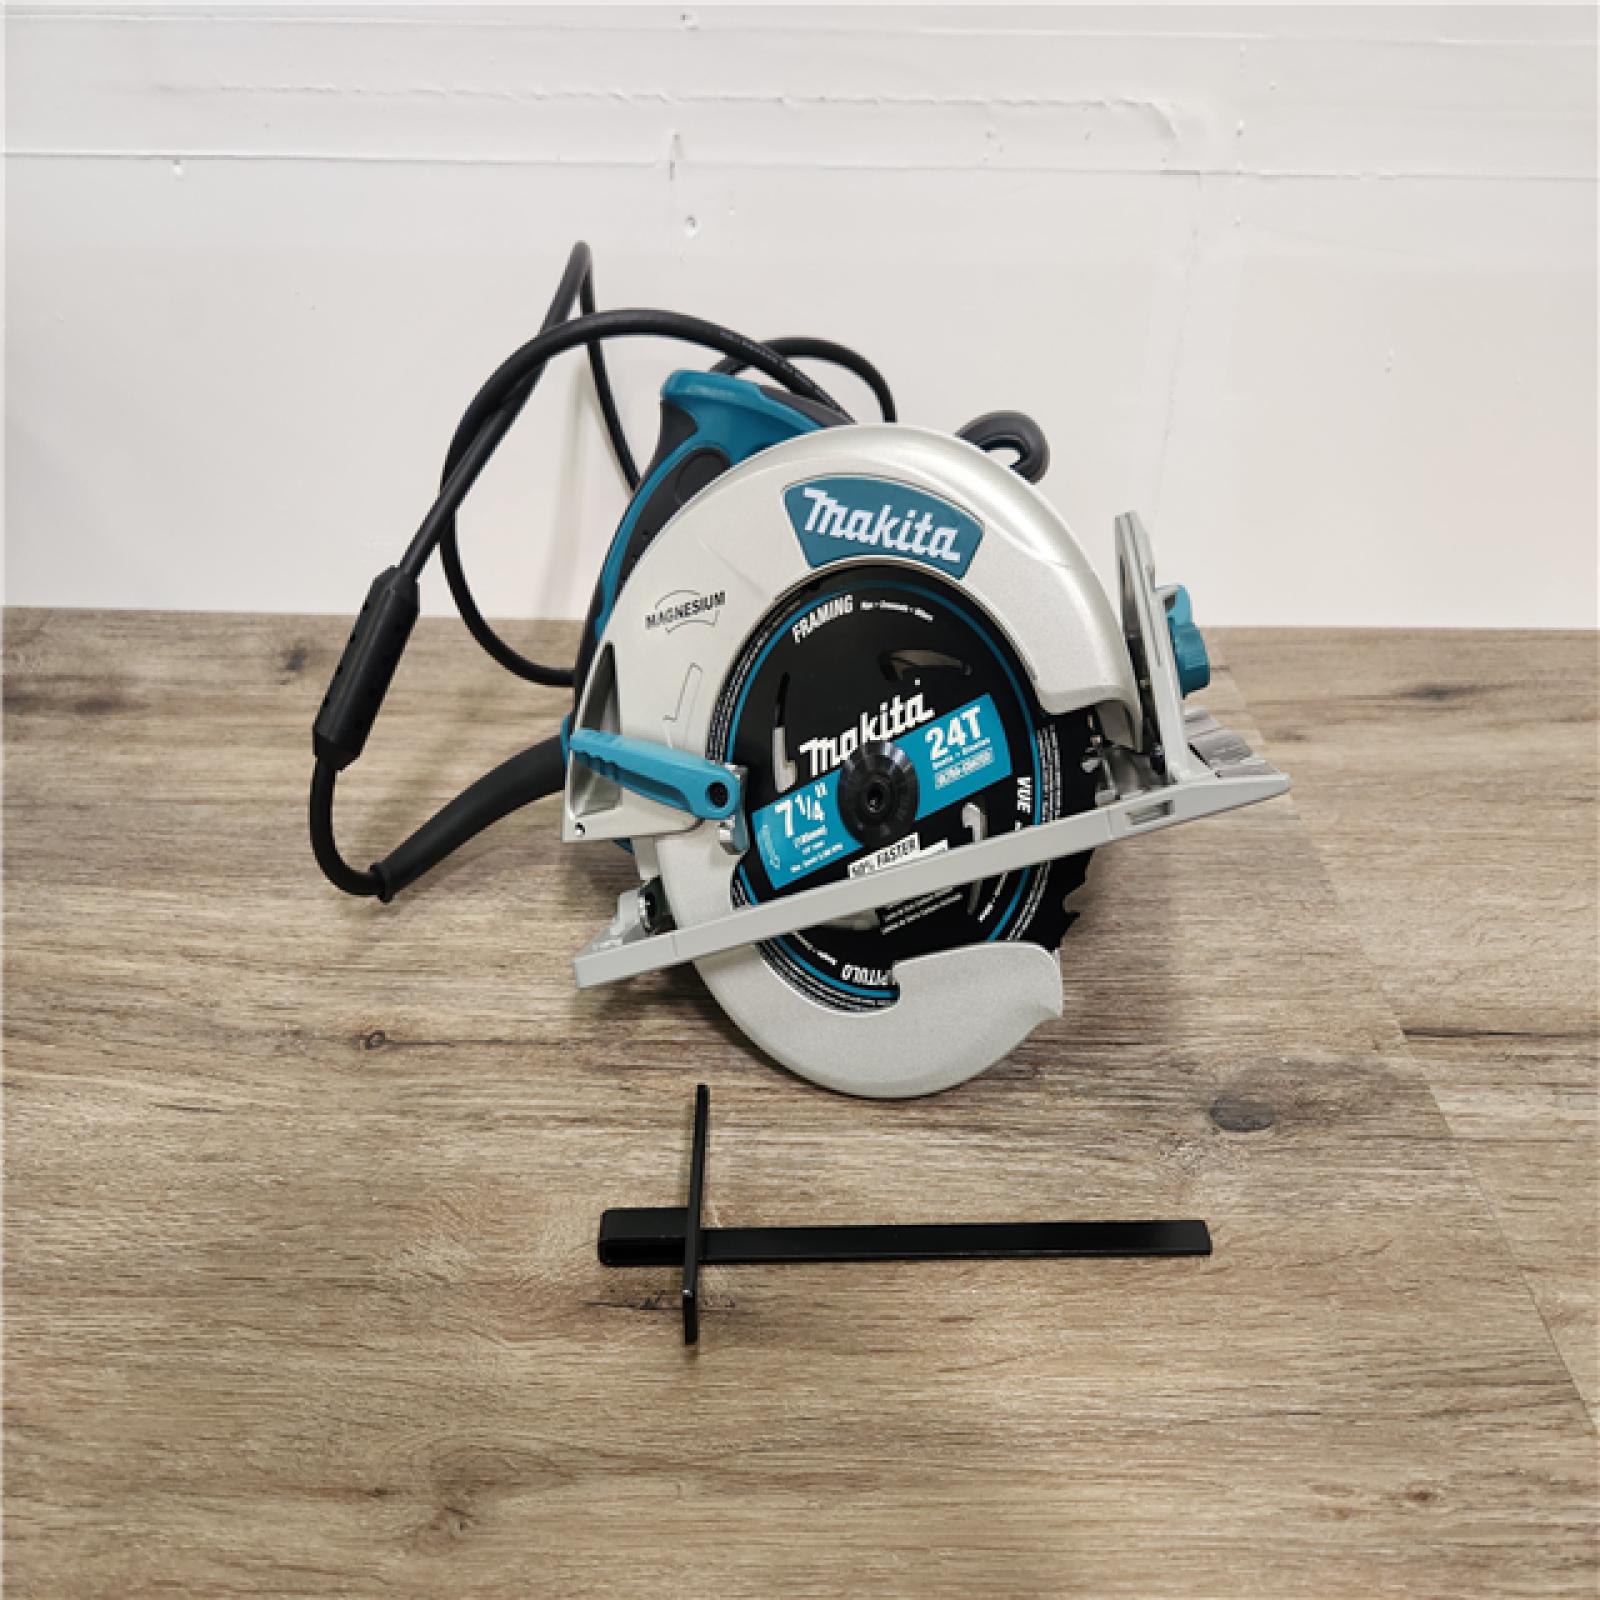 Phoenix Location Appears NEW Makita 15 Amp 7-1/4 in. Corded Lightweight Magnesium Circular Saw with LED Light, Dust Blower, 24T Carbide blade, Hard Case 5007MG